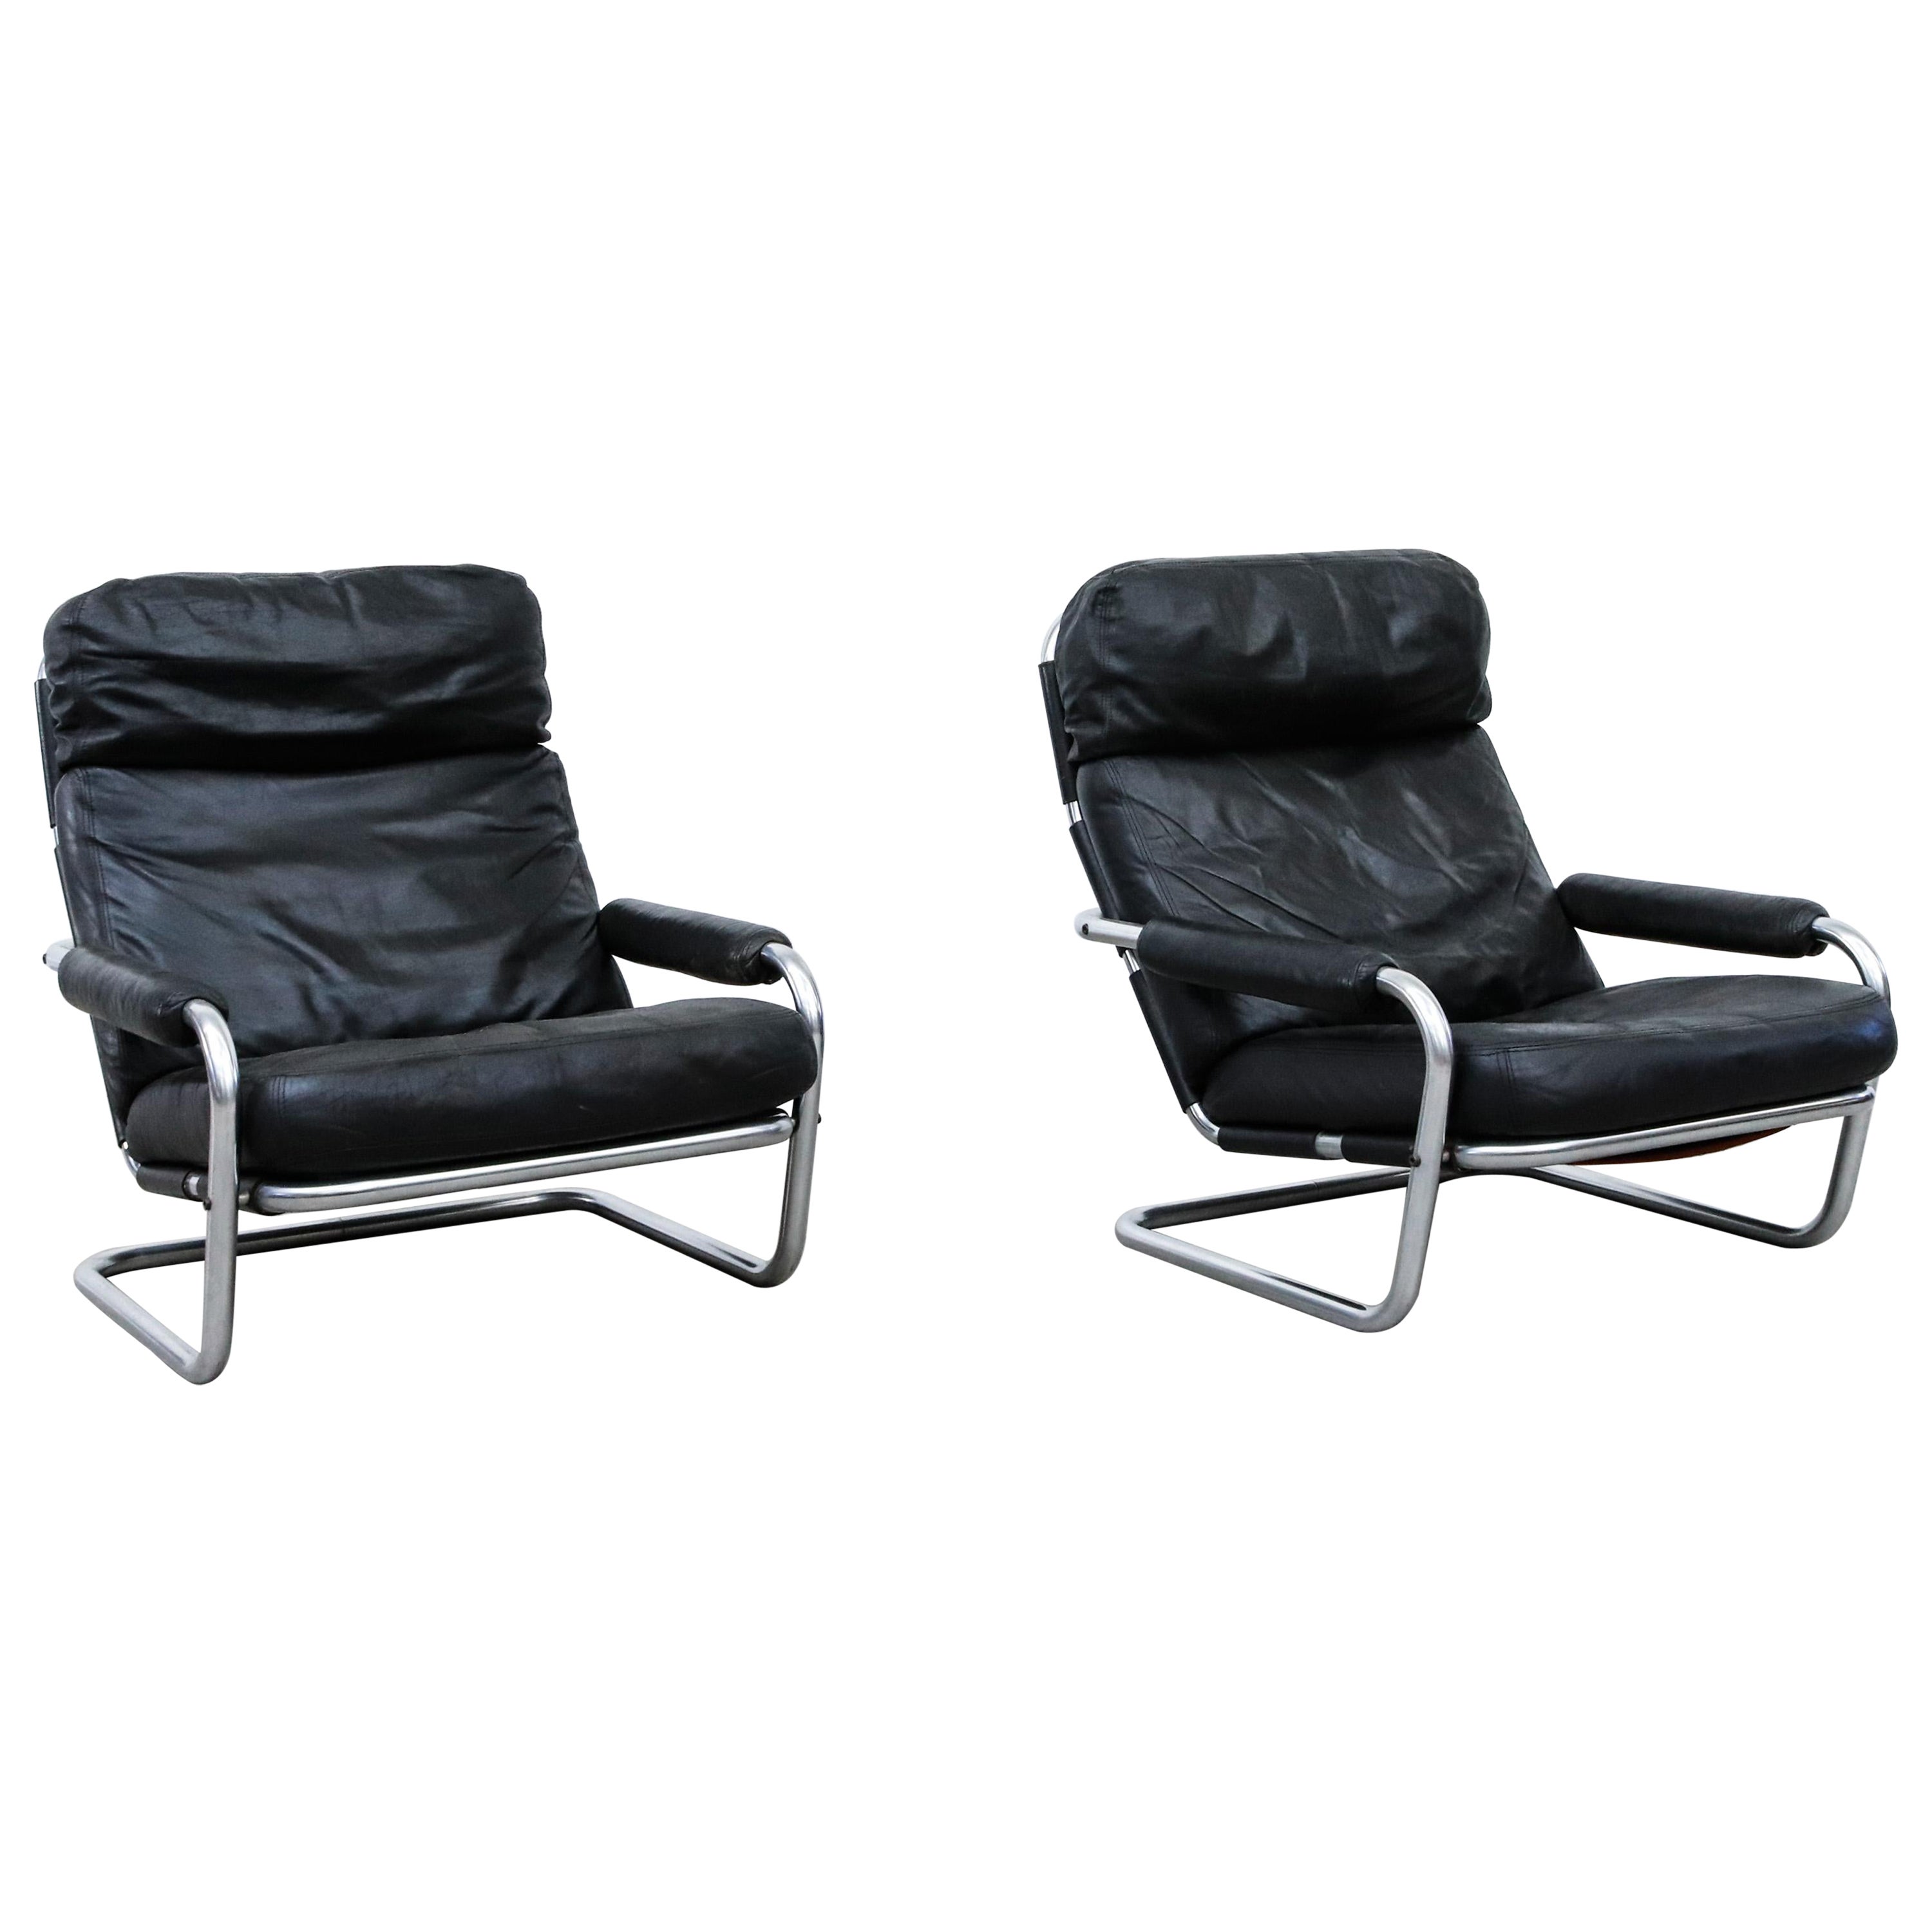 Pair of Jan Des Bouvrie Model S601 Leather Lounge Chairs for Gelderland